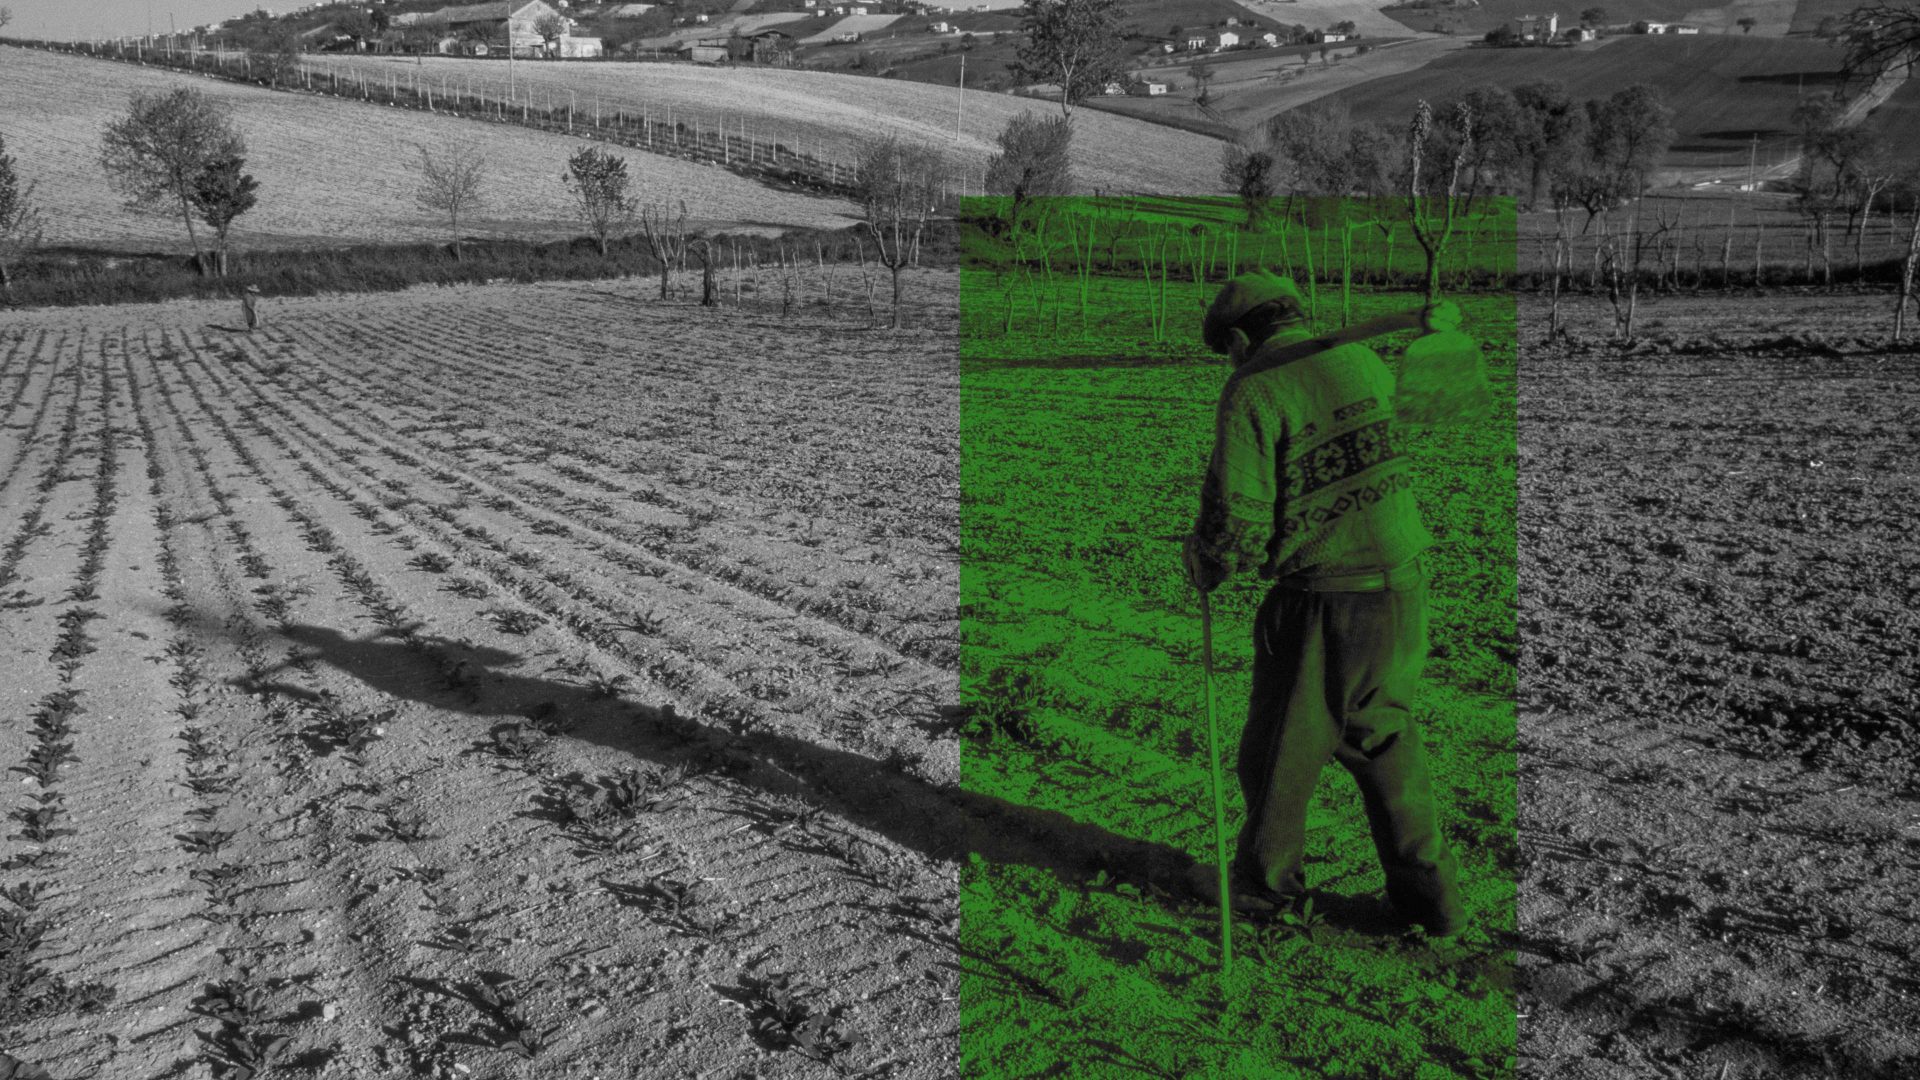 Peasant at work in the fields near Recanati, Marche, Italy. Montage: The New European/Getty